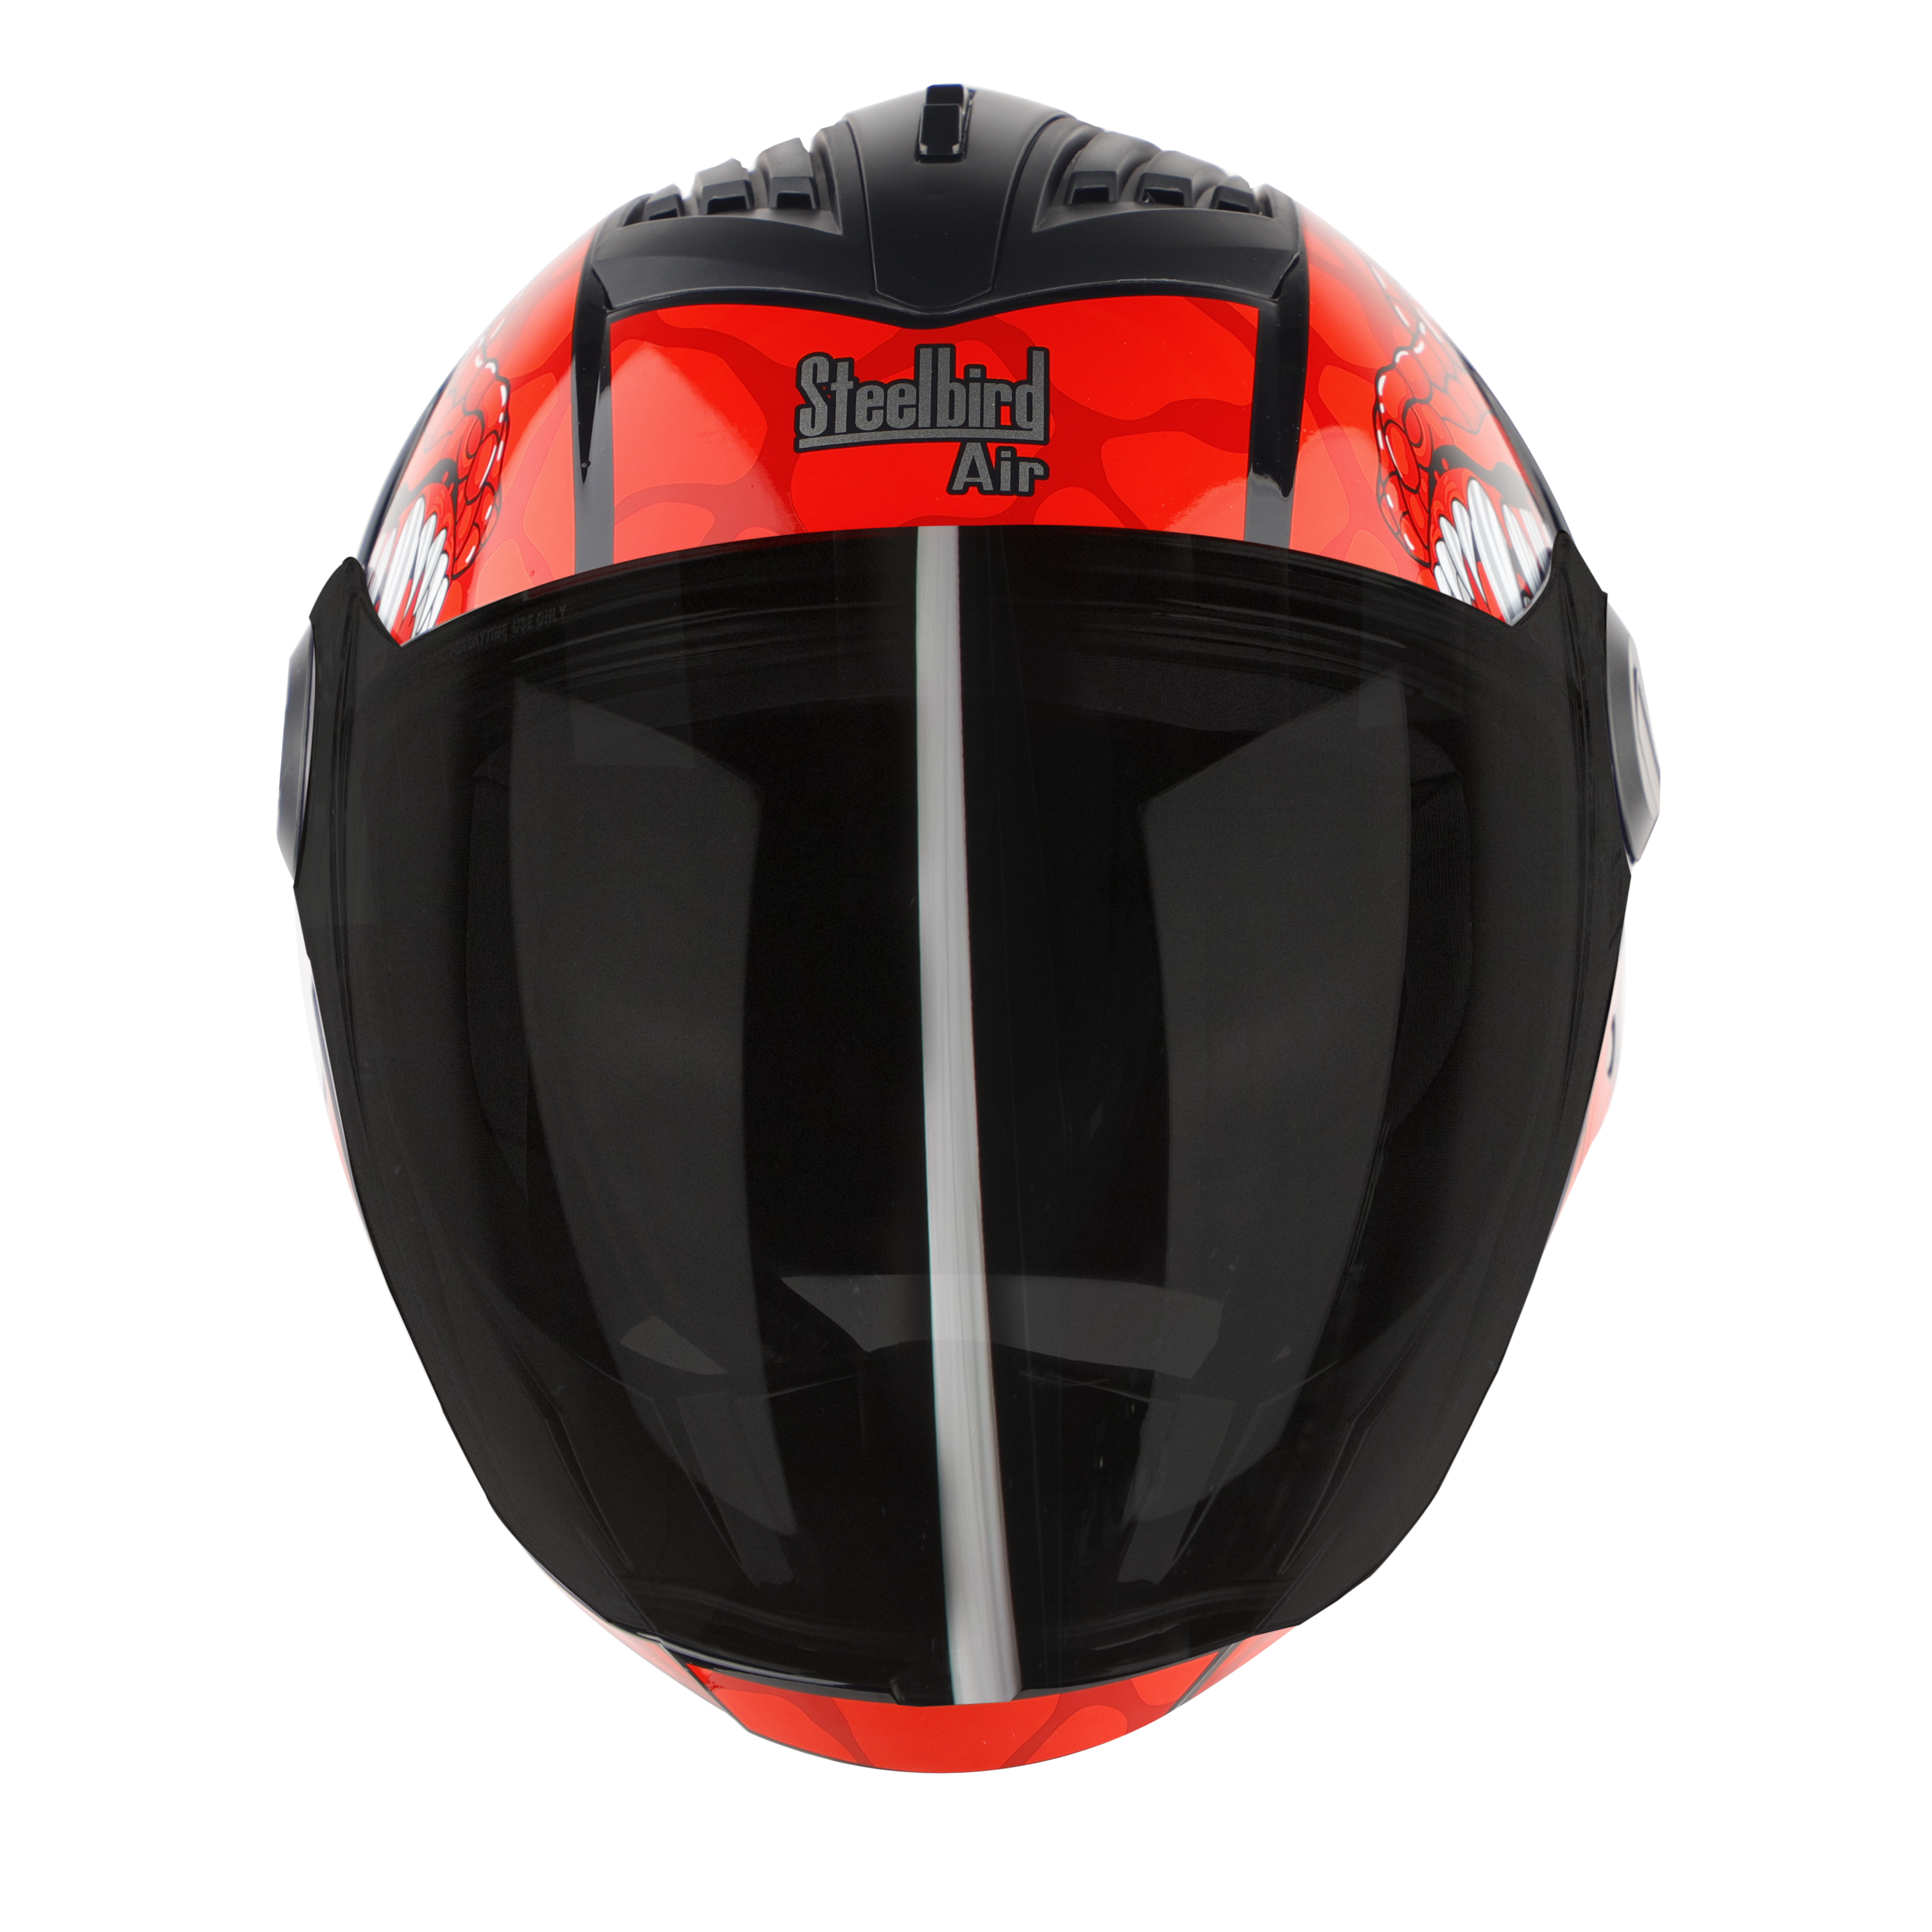 SBA-2 DRAGON MAT BLACK WITH RED (FITTED WITH CLEAR VISOR EXTRA SMOKE VISOR FREE)